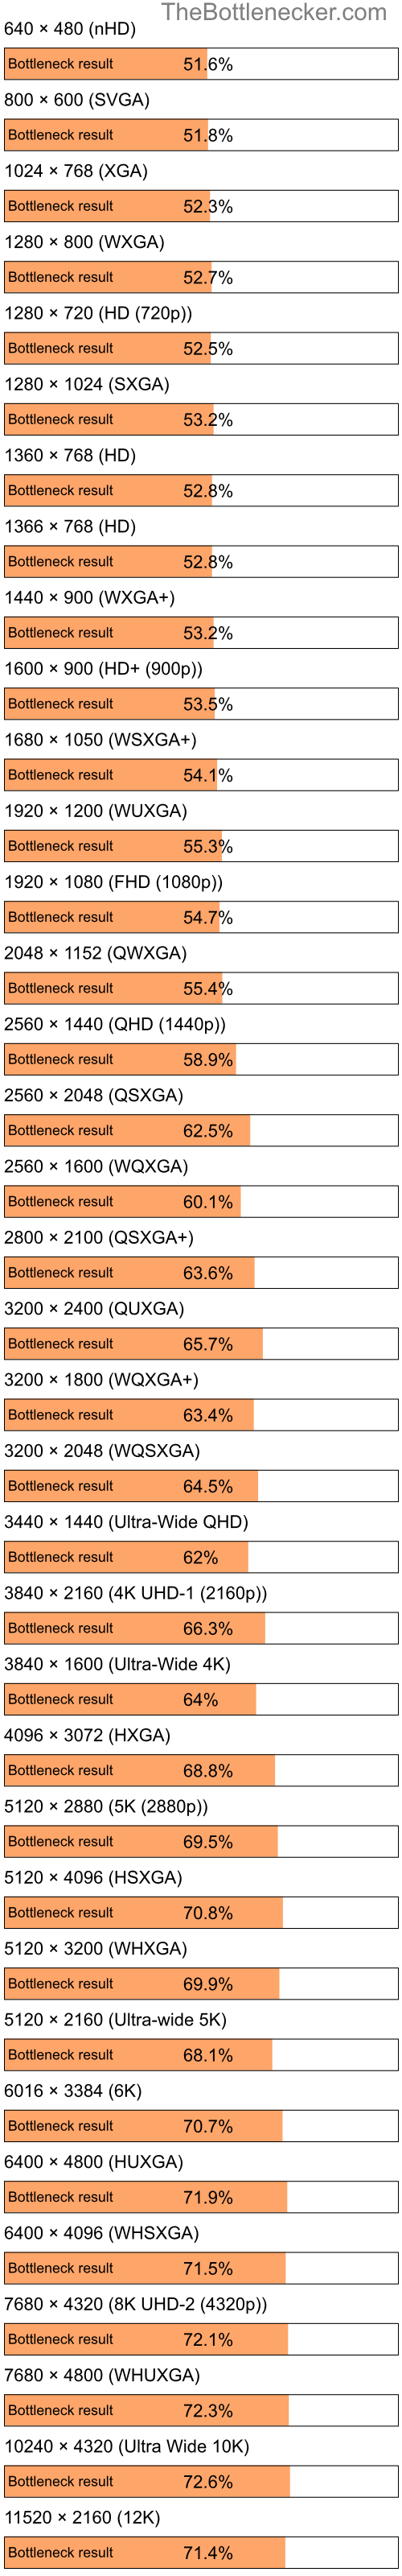 Bottleneck results by resolution for Intel Celeron and NVIDIA Quadro FX 3400 in Processor Intense Tasks